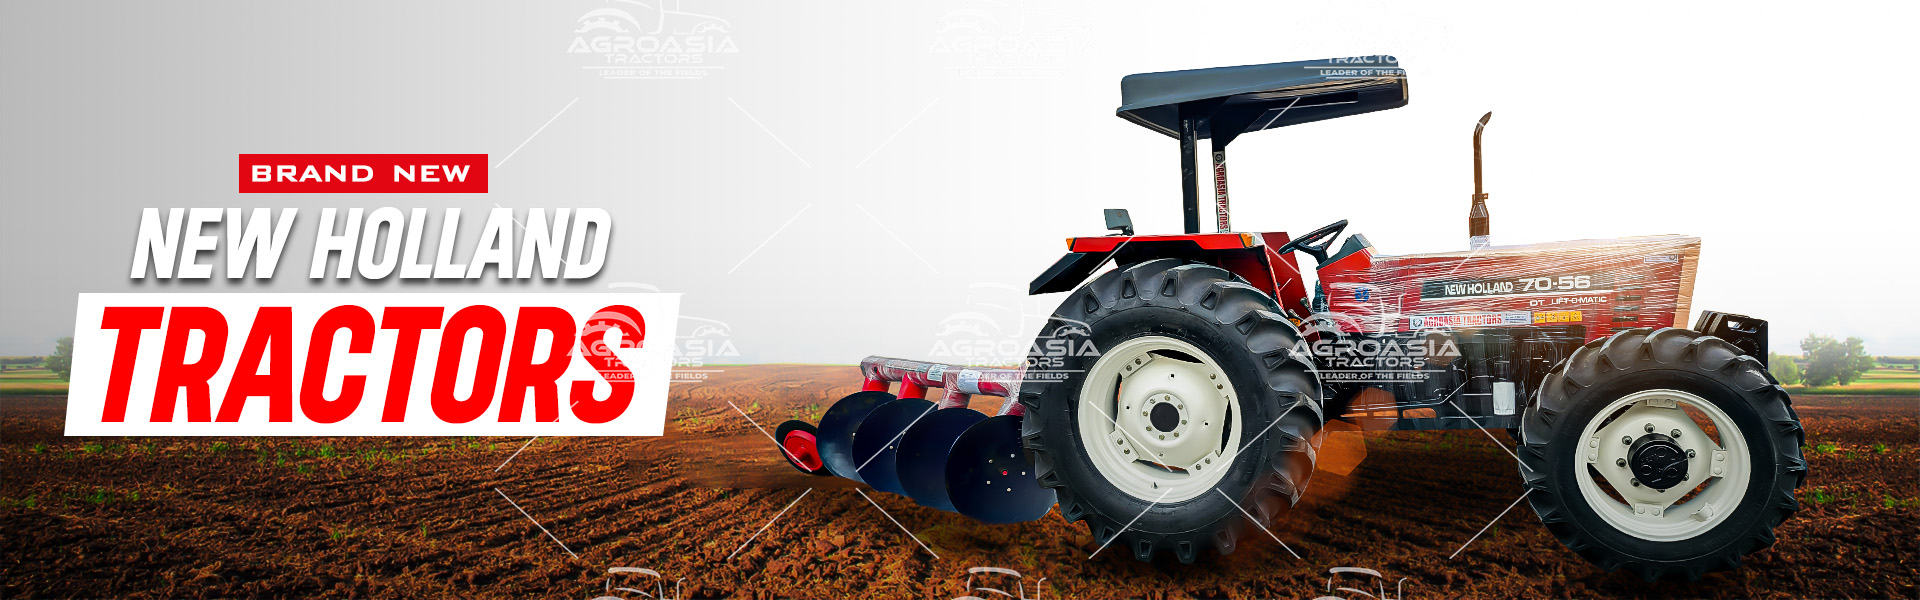 New Holland Tractors for sale in UAE